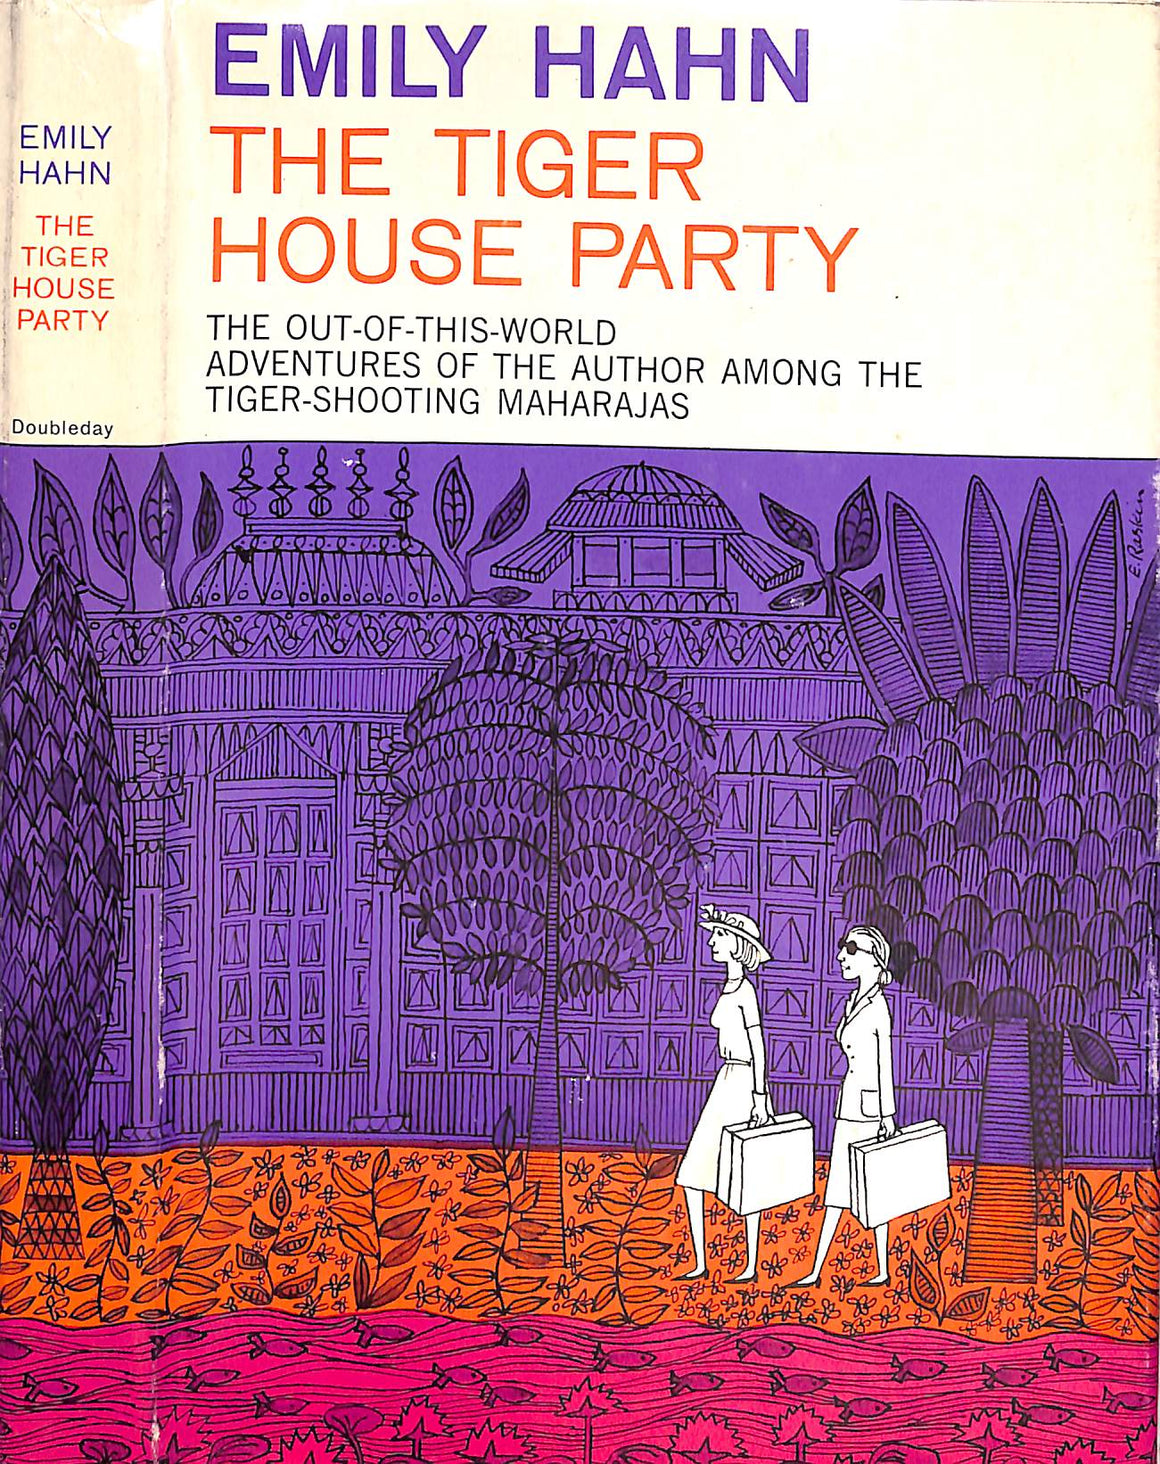 "The Tiger House Party: The Last Days Of The Maharajas" 1959 HAHN, Emily